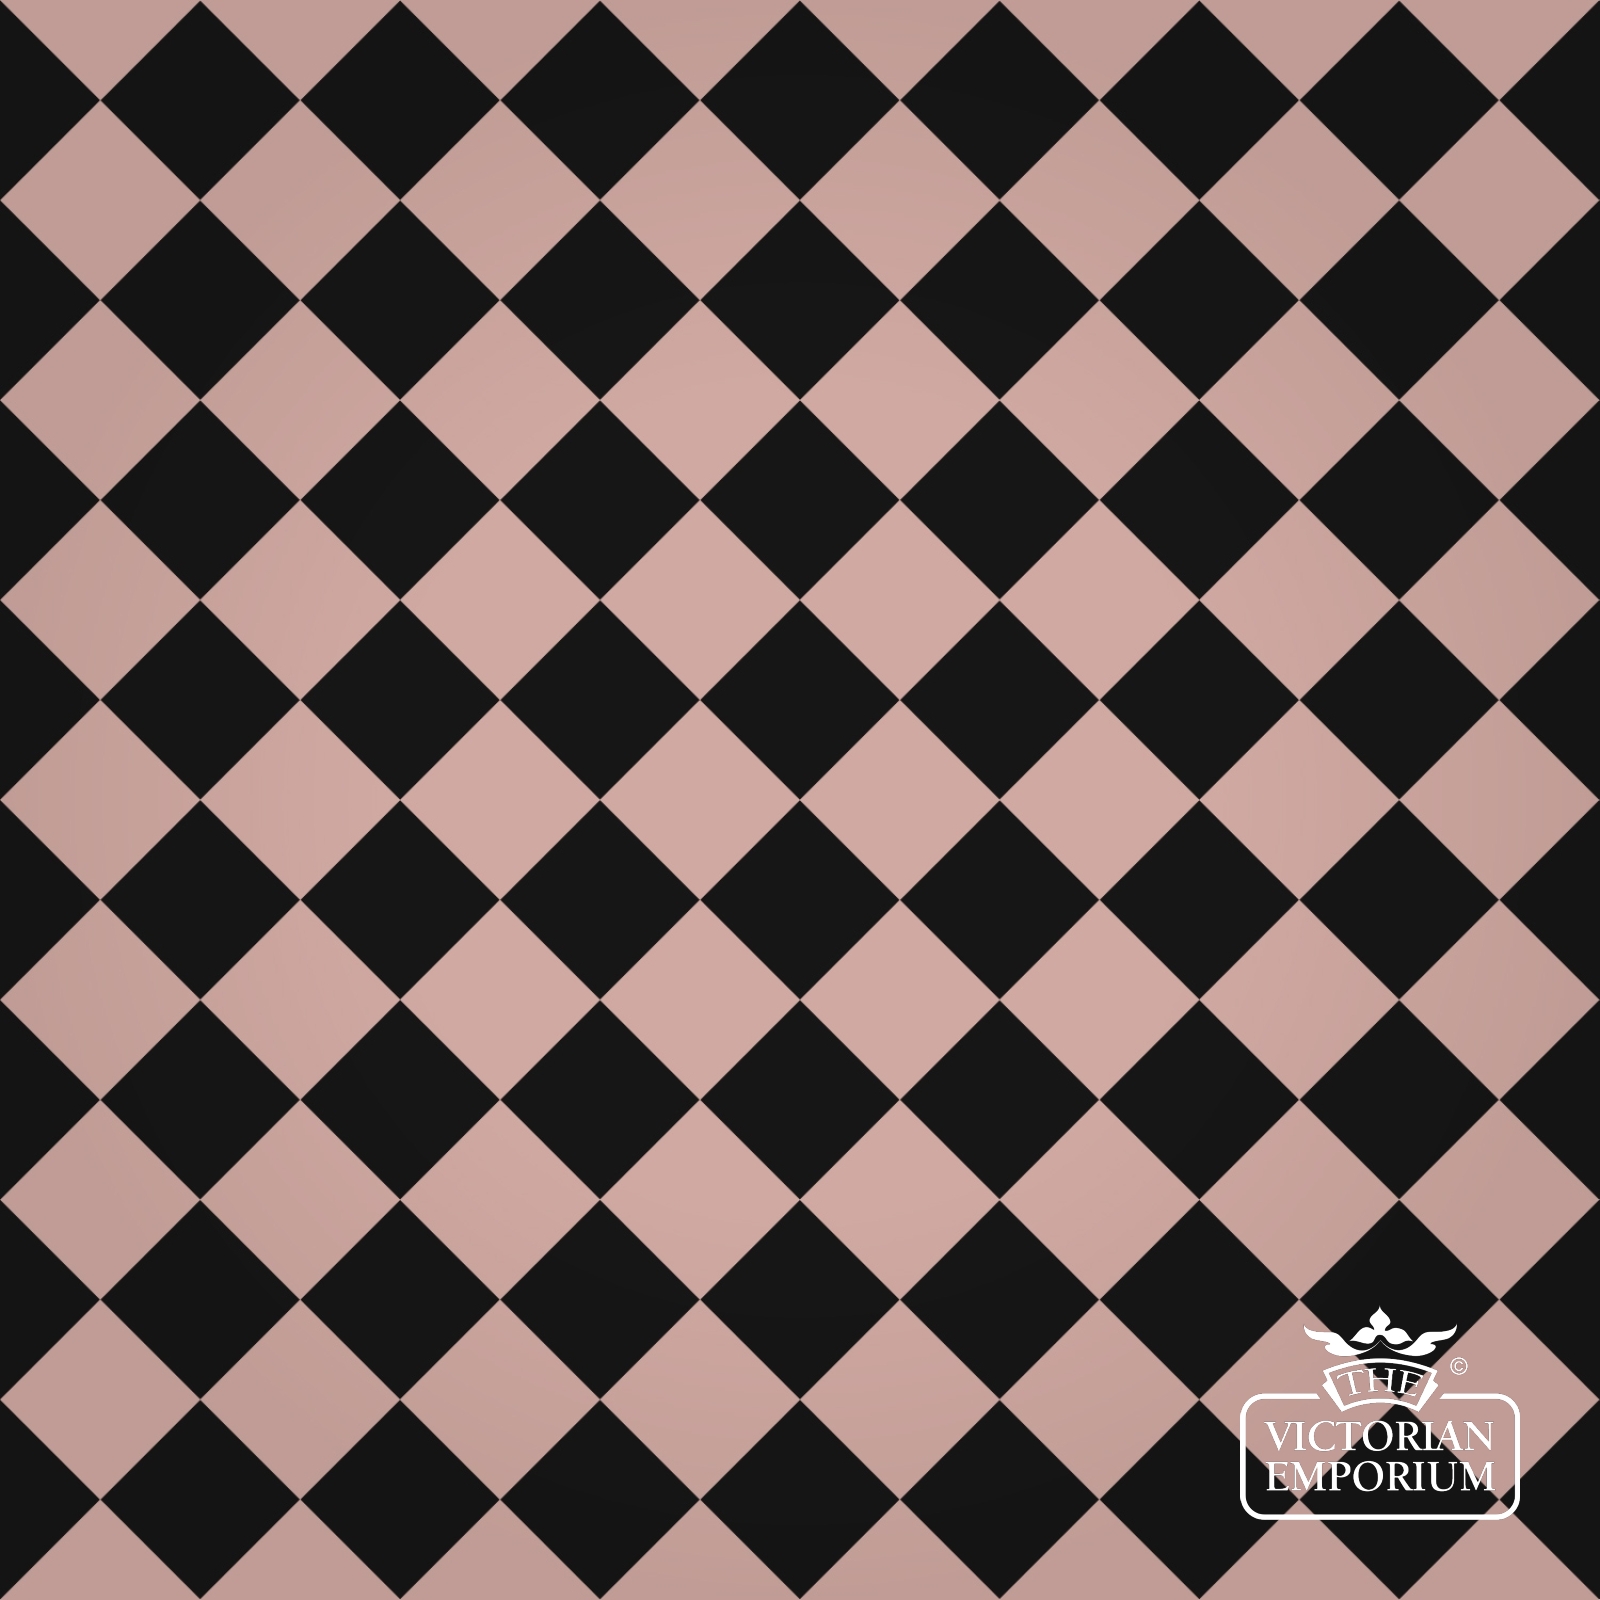 Victorian Path tiles - Black and Pink 64mm x 64mm squares (suitable for outdoor use)